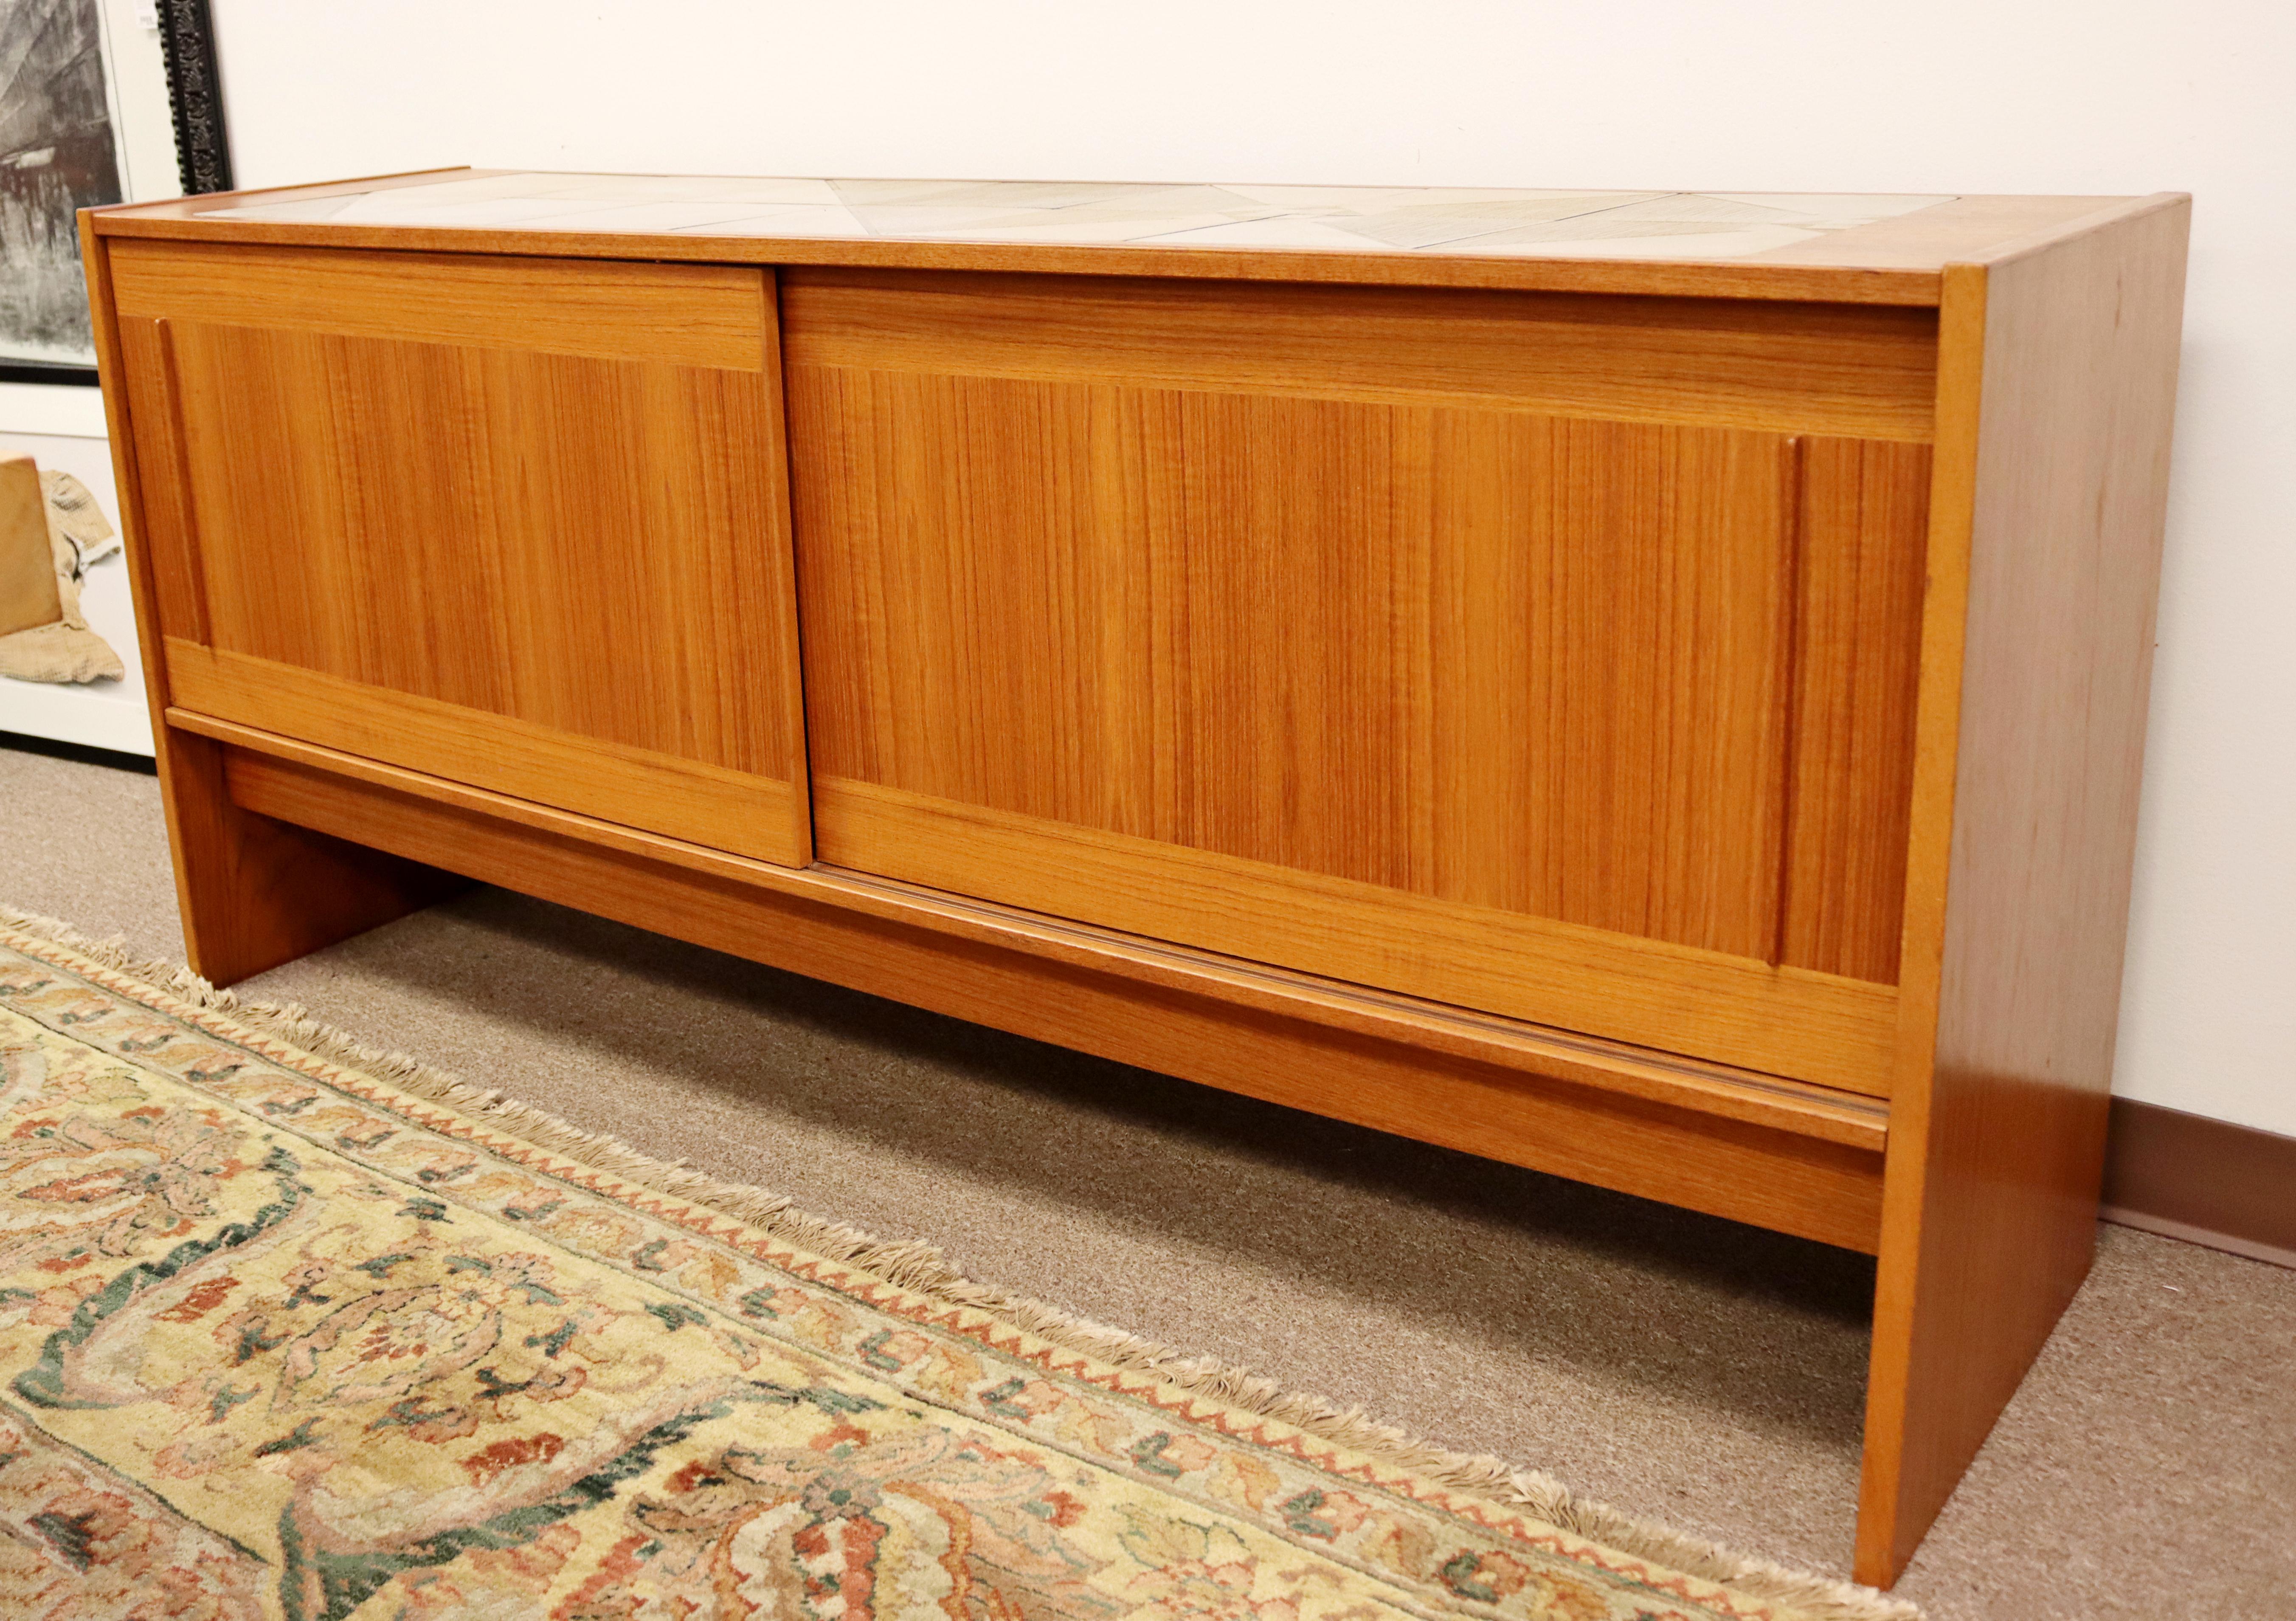 For your consideration is a marvelous, tile top credenza, made of teak and with sliding doors, by Gangso Mobler, made in Denmark, circa the 1970s. In excellent vintage condition. The dimensions are 66.5